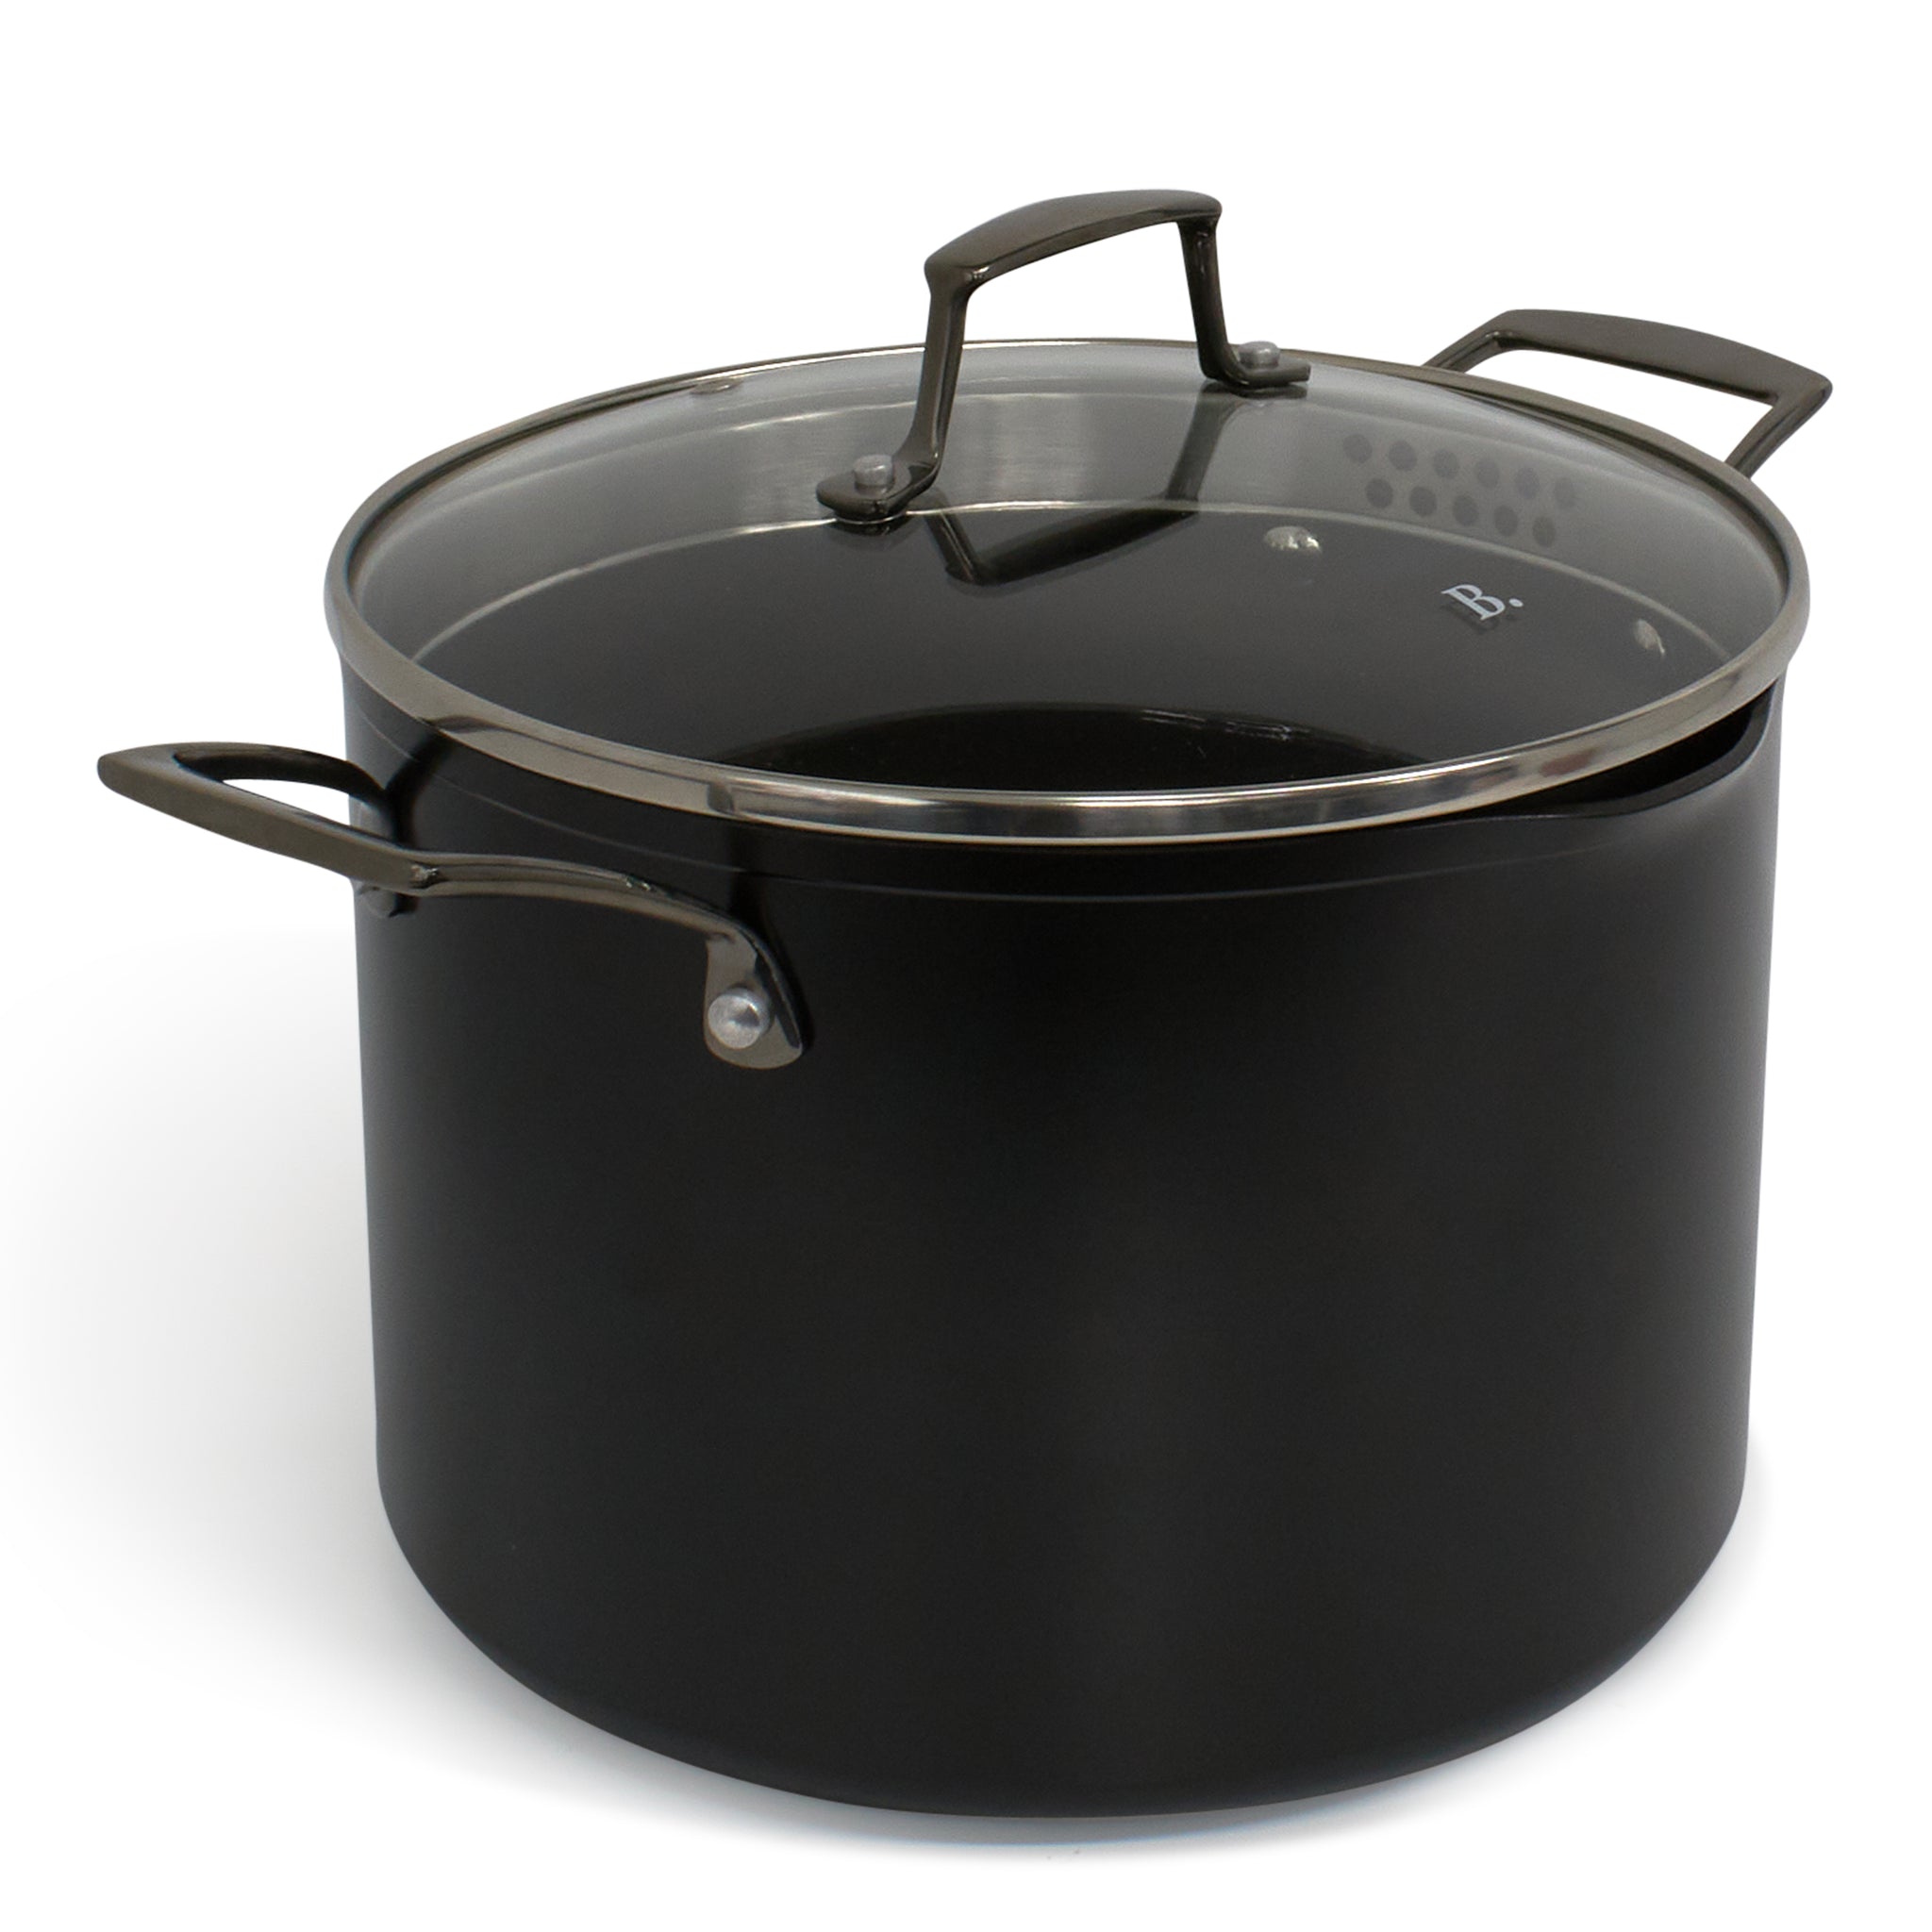 24cm Stock Pot with double strainer lid